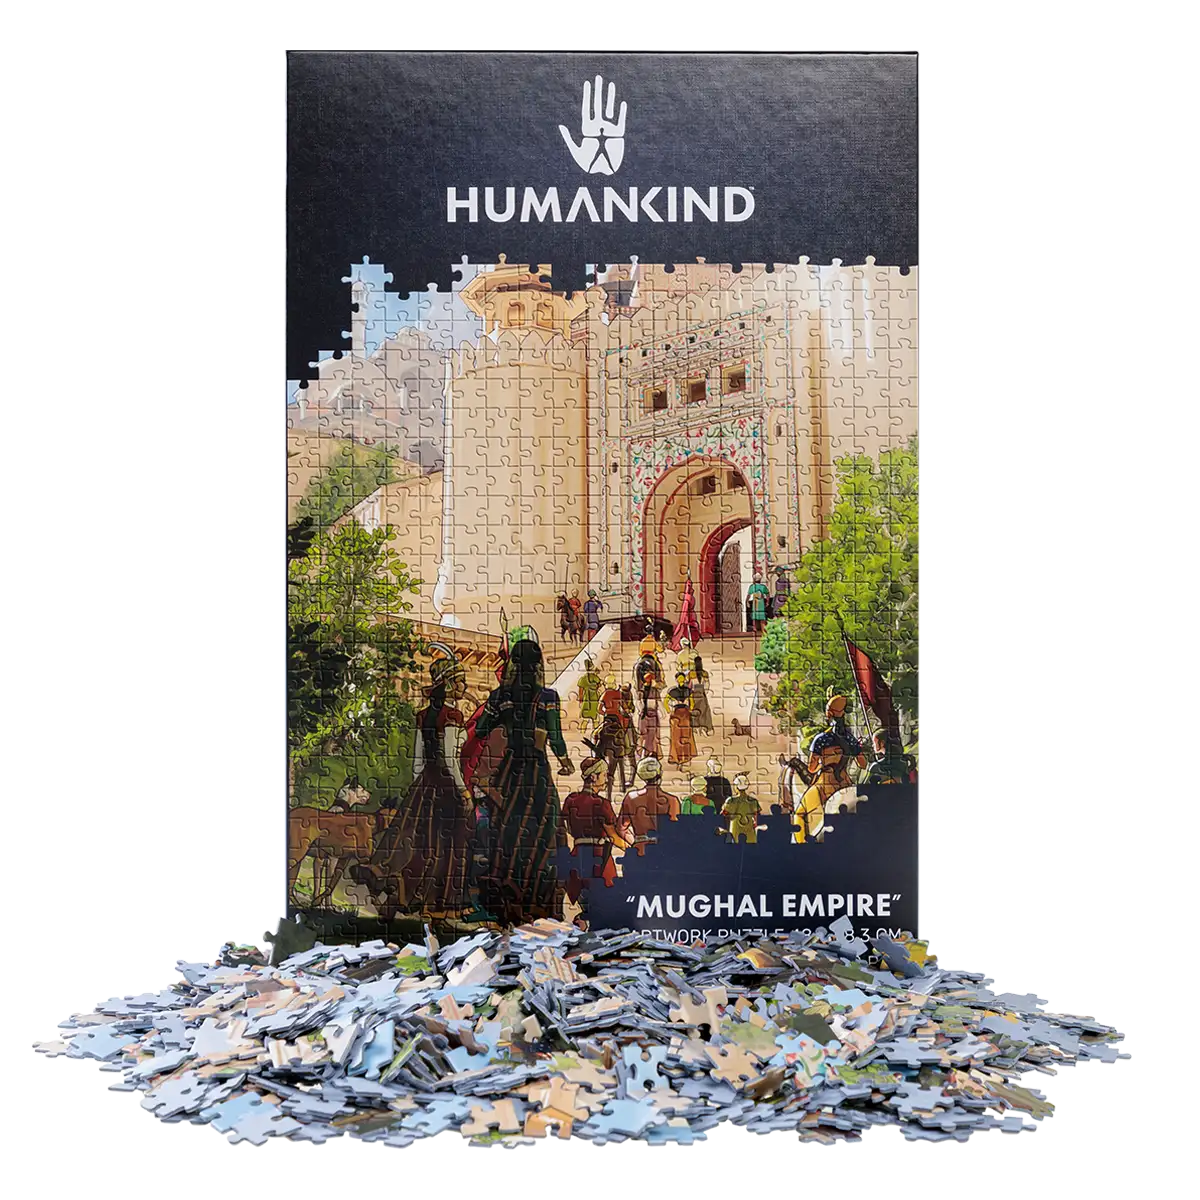 Humankind Puzzle "Mughal Empire"